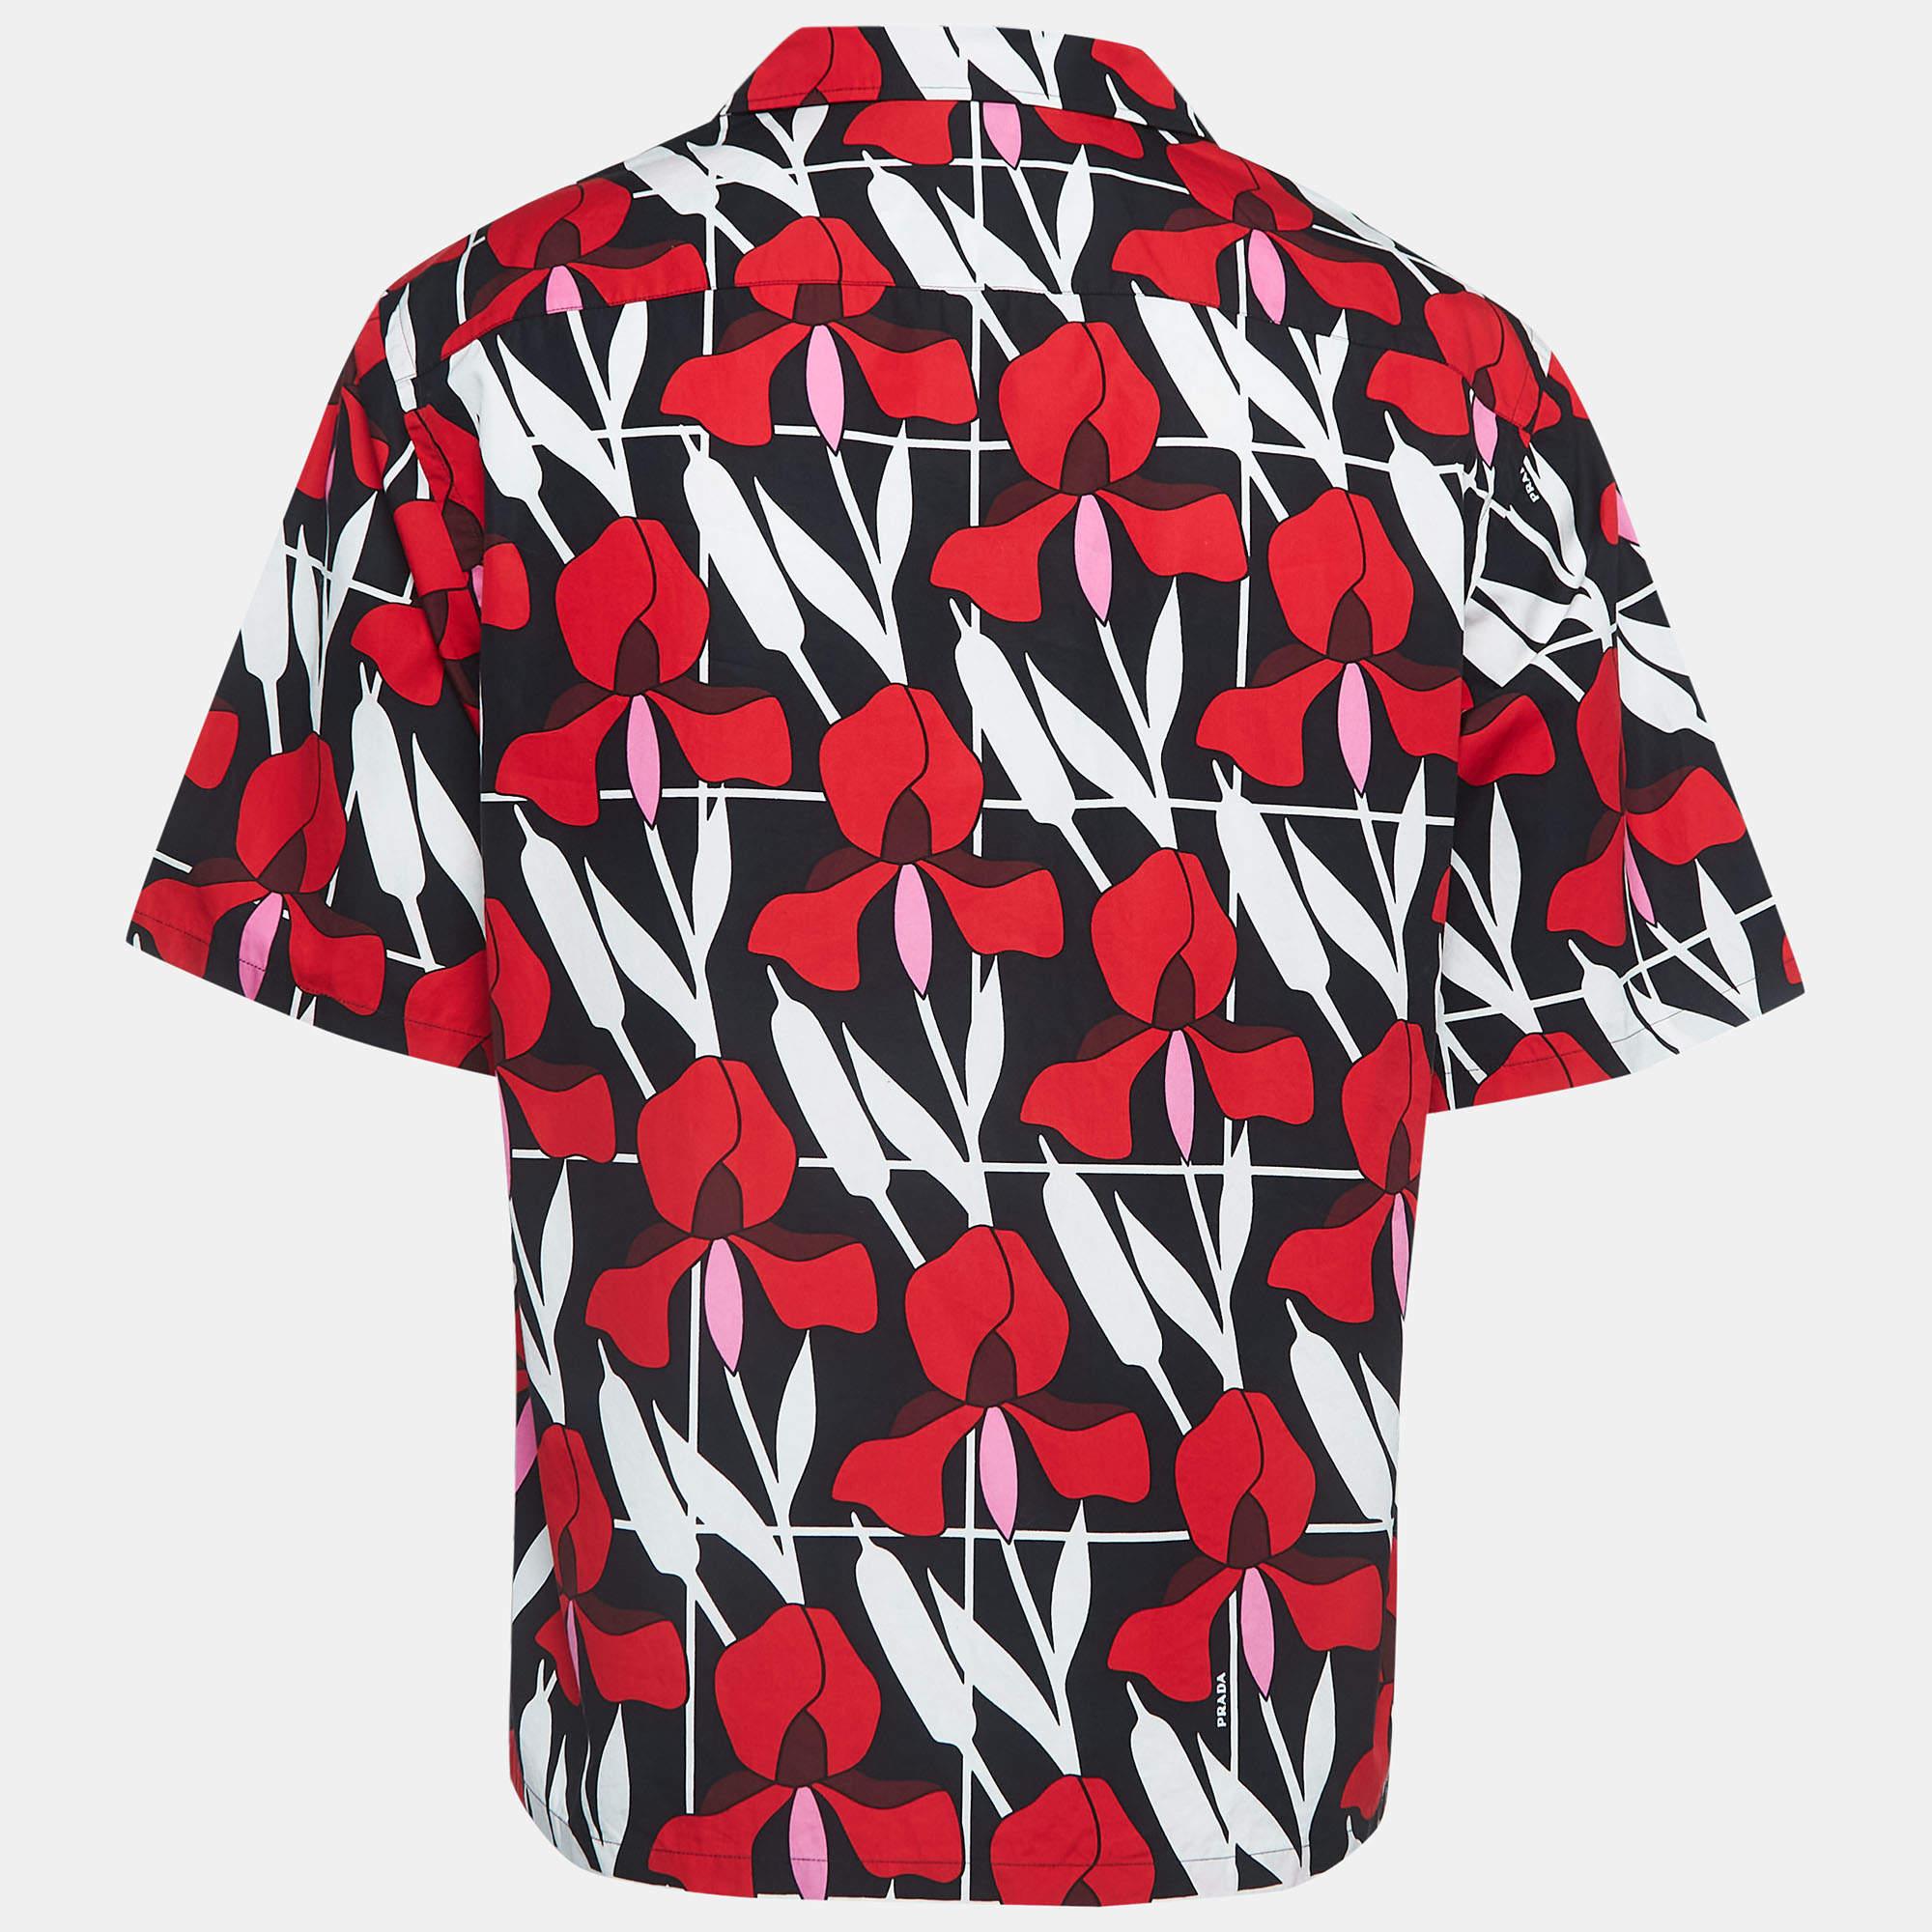 Tailored from quality materials, this Prada shirt has a fun and playful appeal. The creation is highlighted with floral print and is complemented with short sleeves, an external pocket, and front button fastening. Team it up with shorts for your